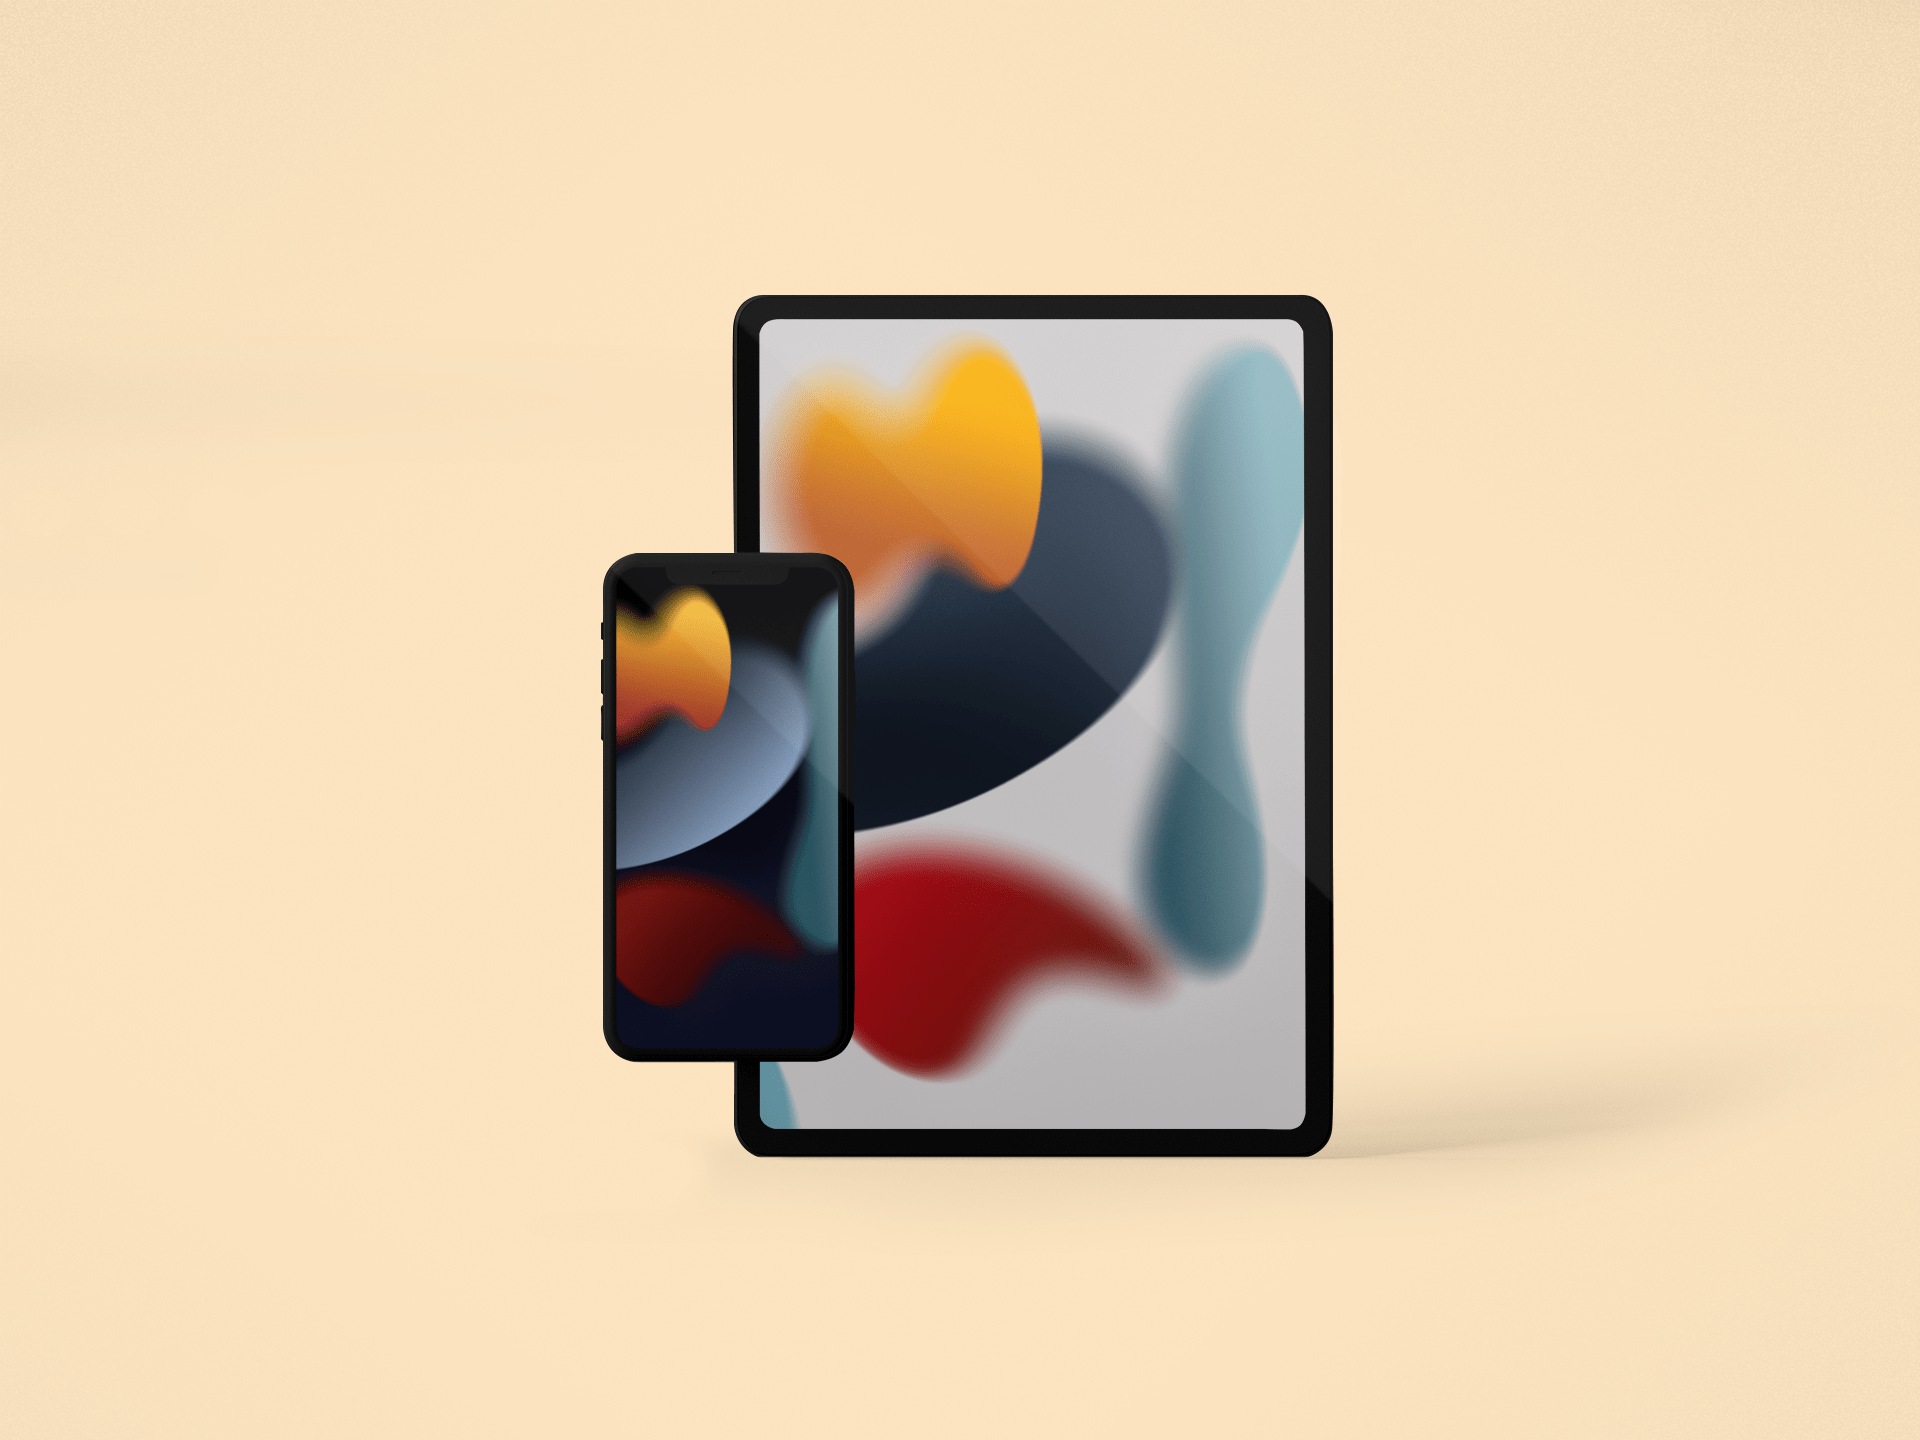 iOS 15 official wallpapers